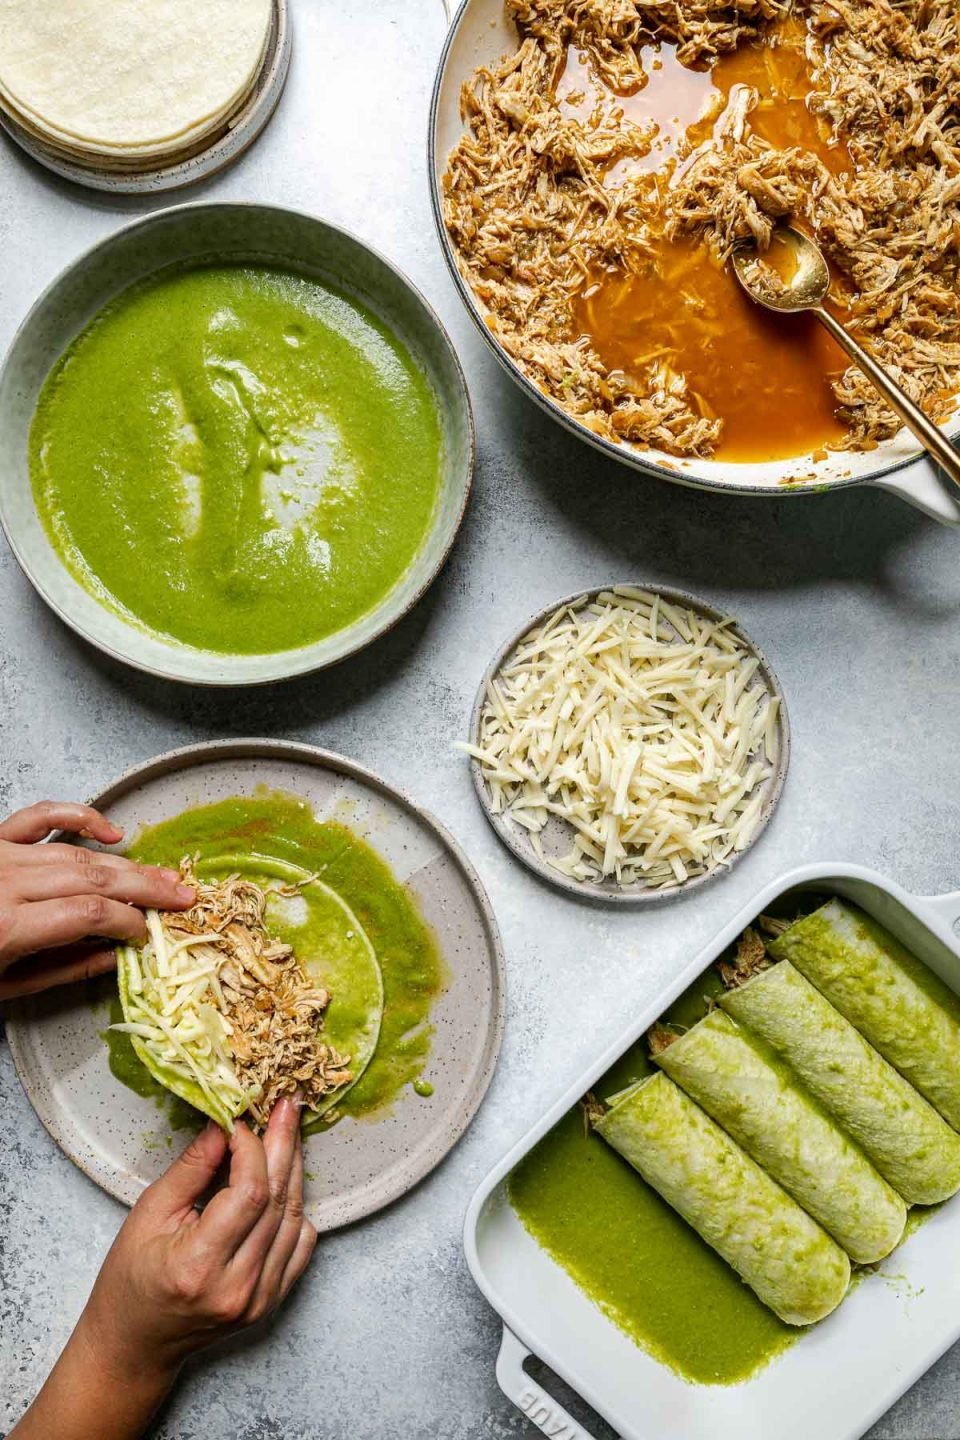 Green enchiladas assembly – green chicken enchiladas components (shredded chicken, shredded cheese, corn tortillas, & green enchiladas sauce atop a light blue surface. A woman's hands reach into the frame, wrapping chicken & cheese into a enchilada sauce-coated corn tortilla.